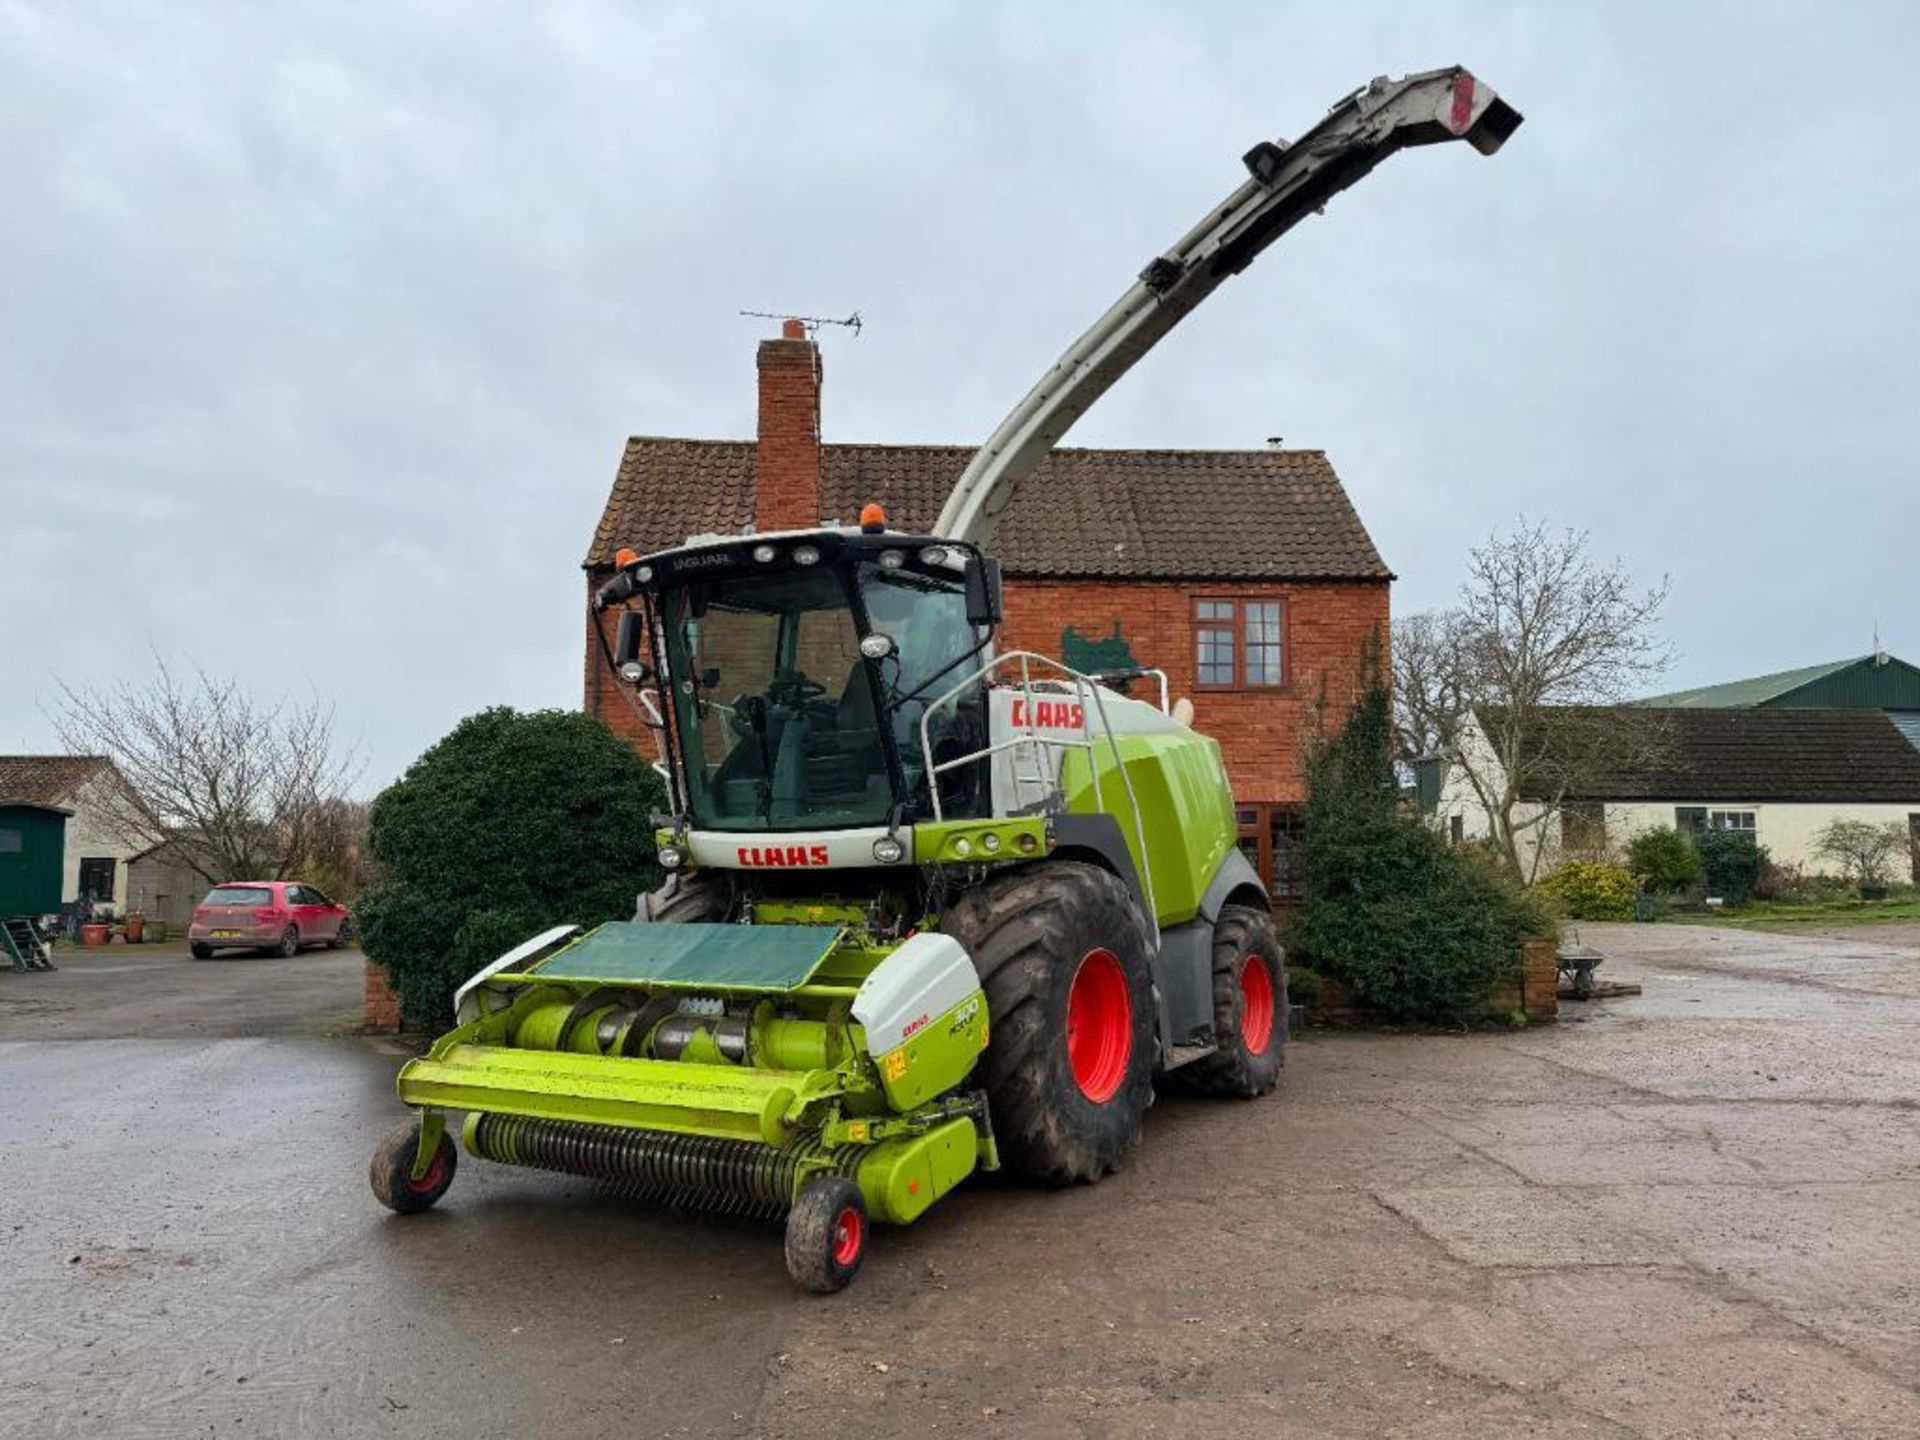 2014 Claas Jaguar 970 self-propelled forage harvester with rock stop, metal detector, rear and spout